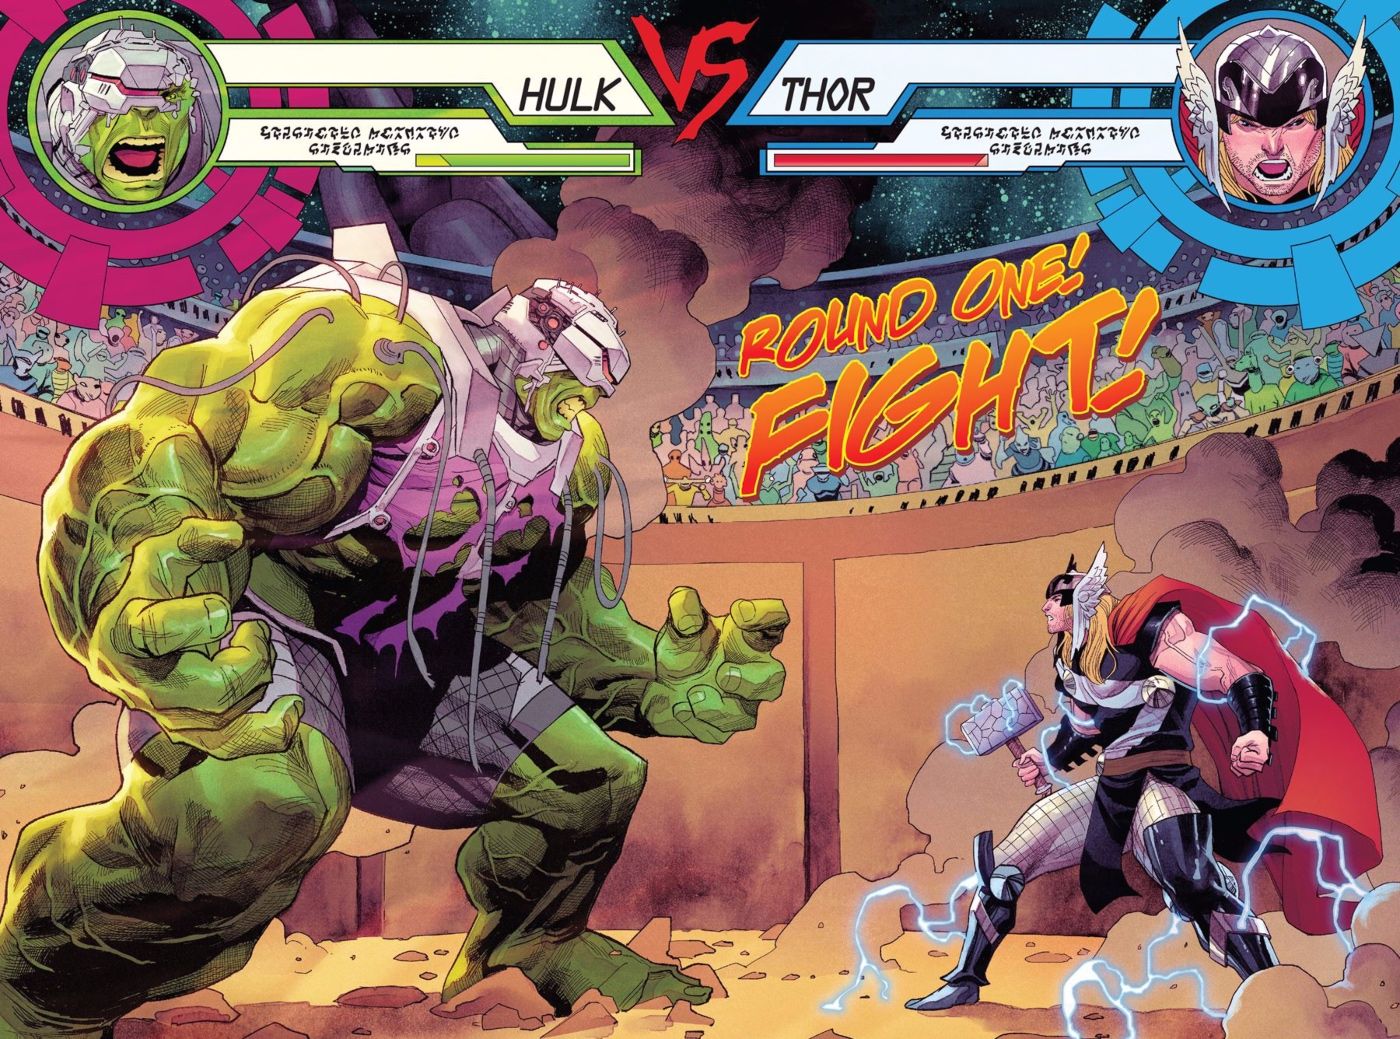 Thor and Hulk have entered Street Fighter.